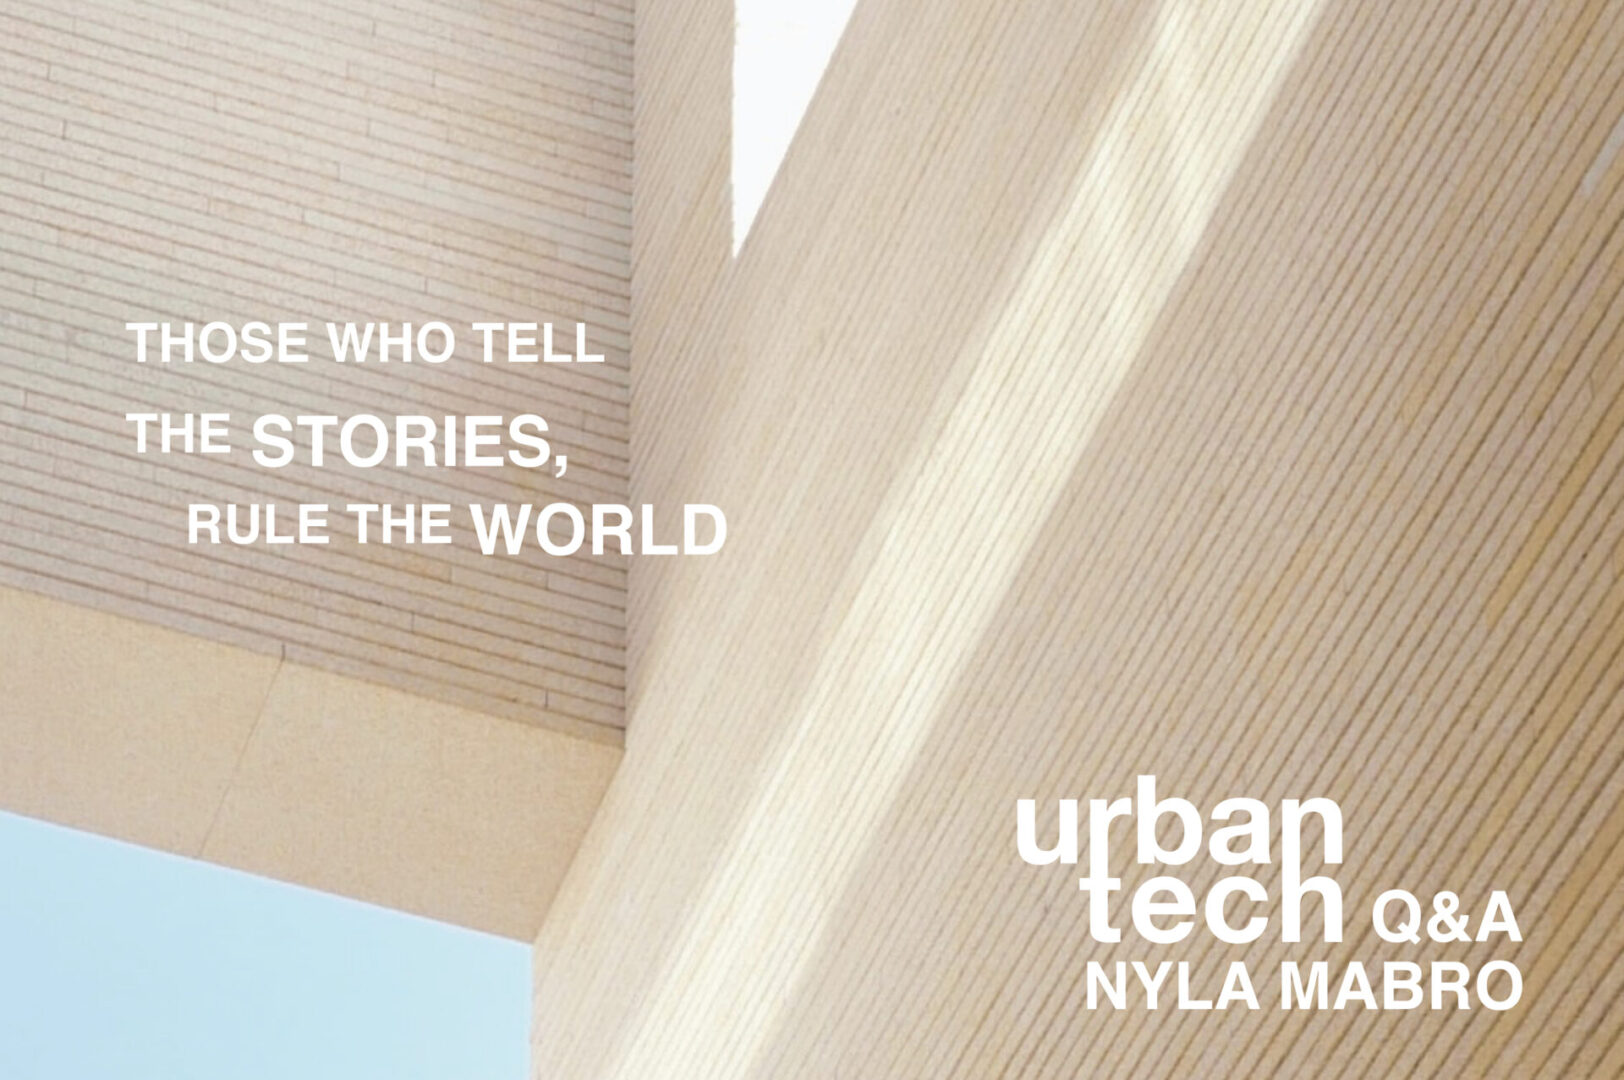 Those who tell the stories, rule the world - urbantech q&a with Nyla Mabro